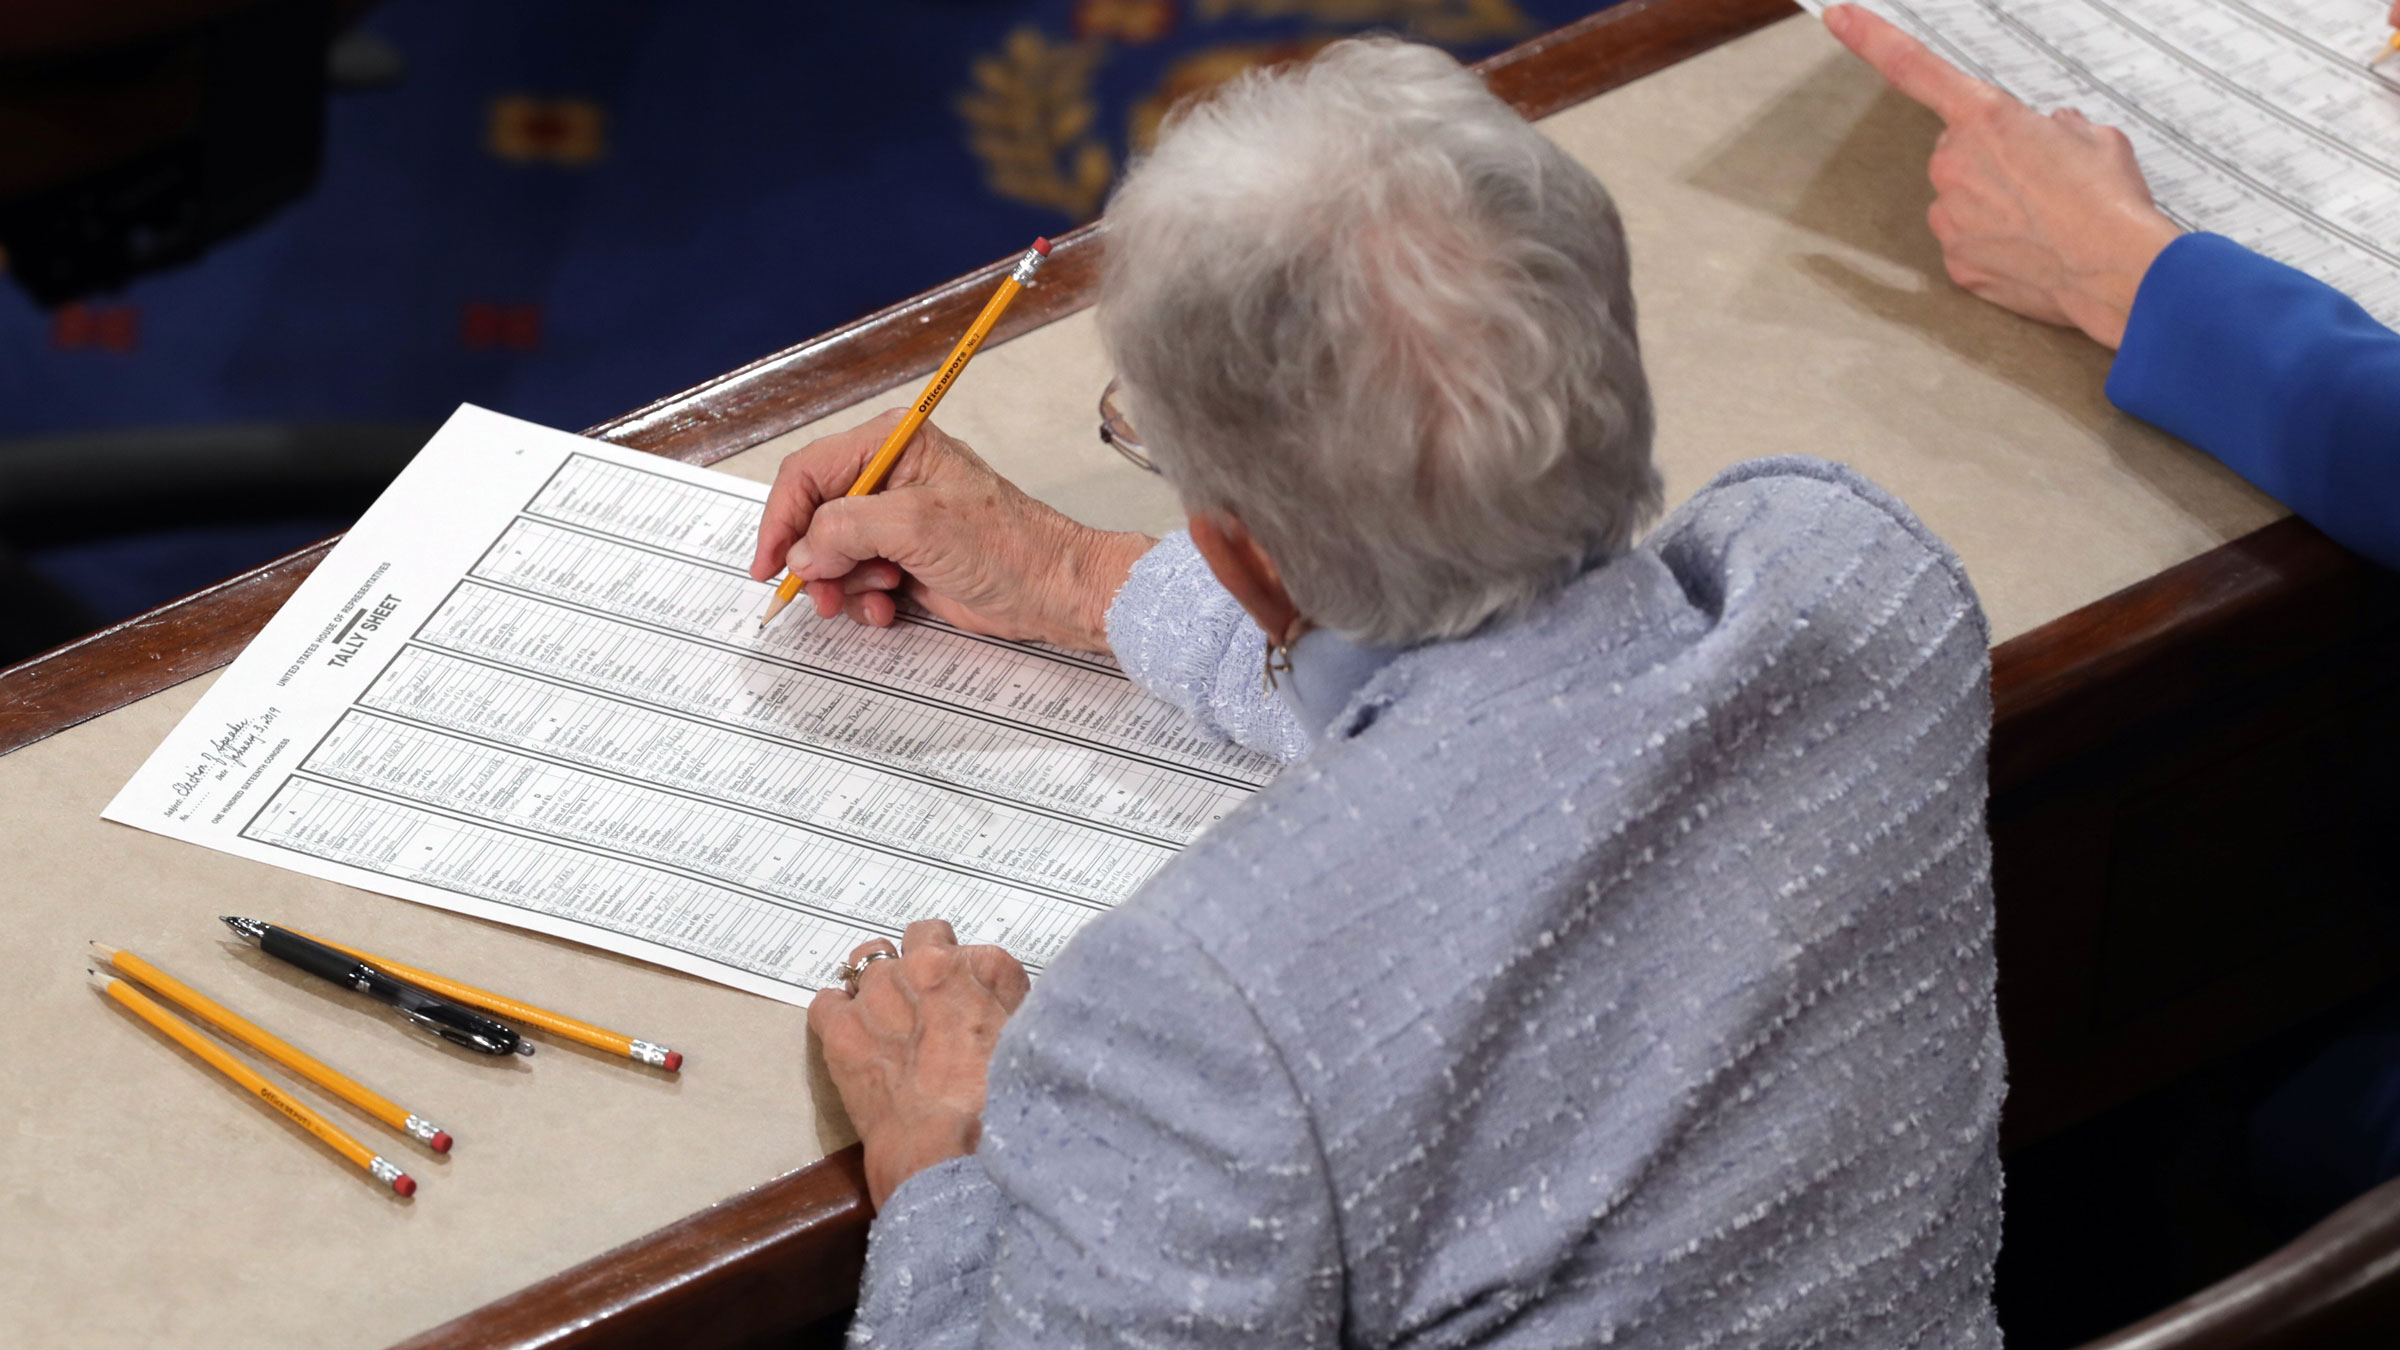 Votes are tallied during the first session of the 116th Congress in 2019.